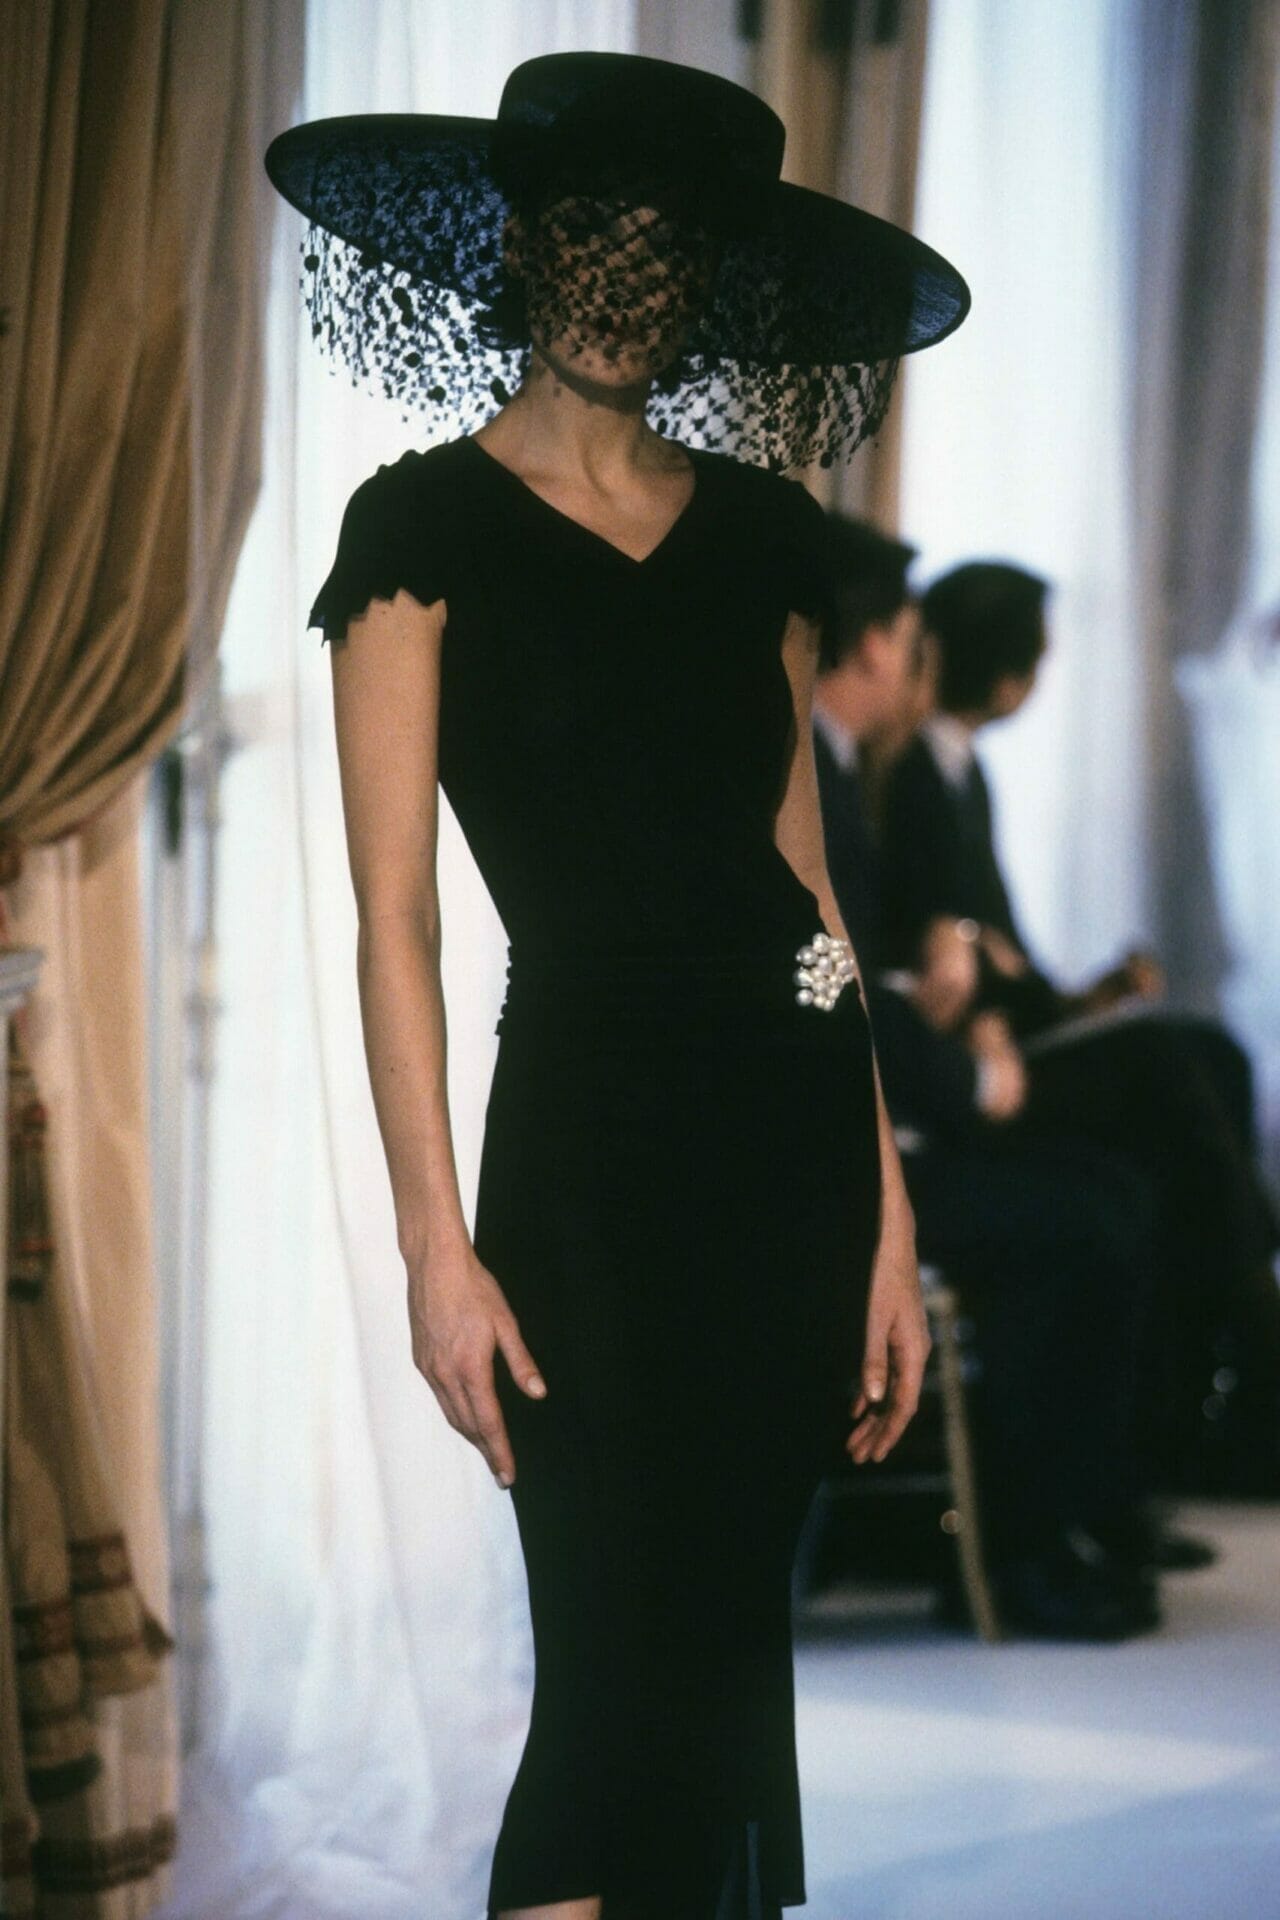 Chanel Spring 1997 Couture Show (Chanel)